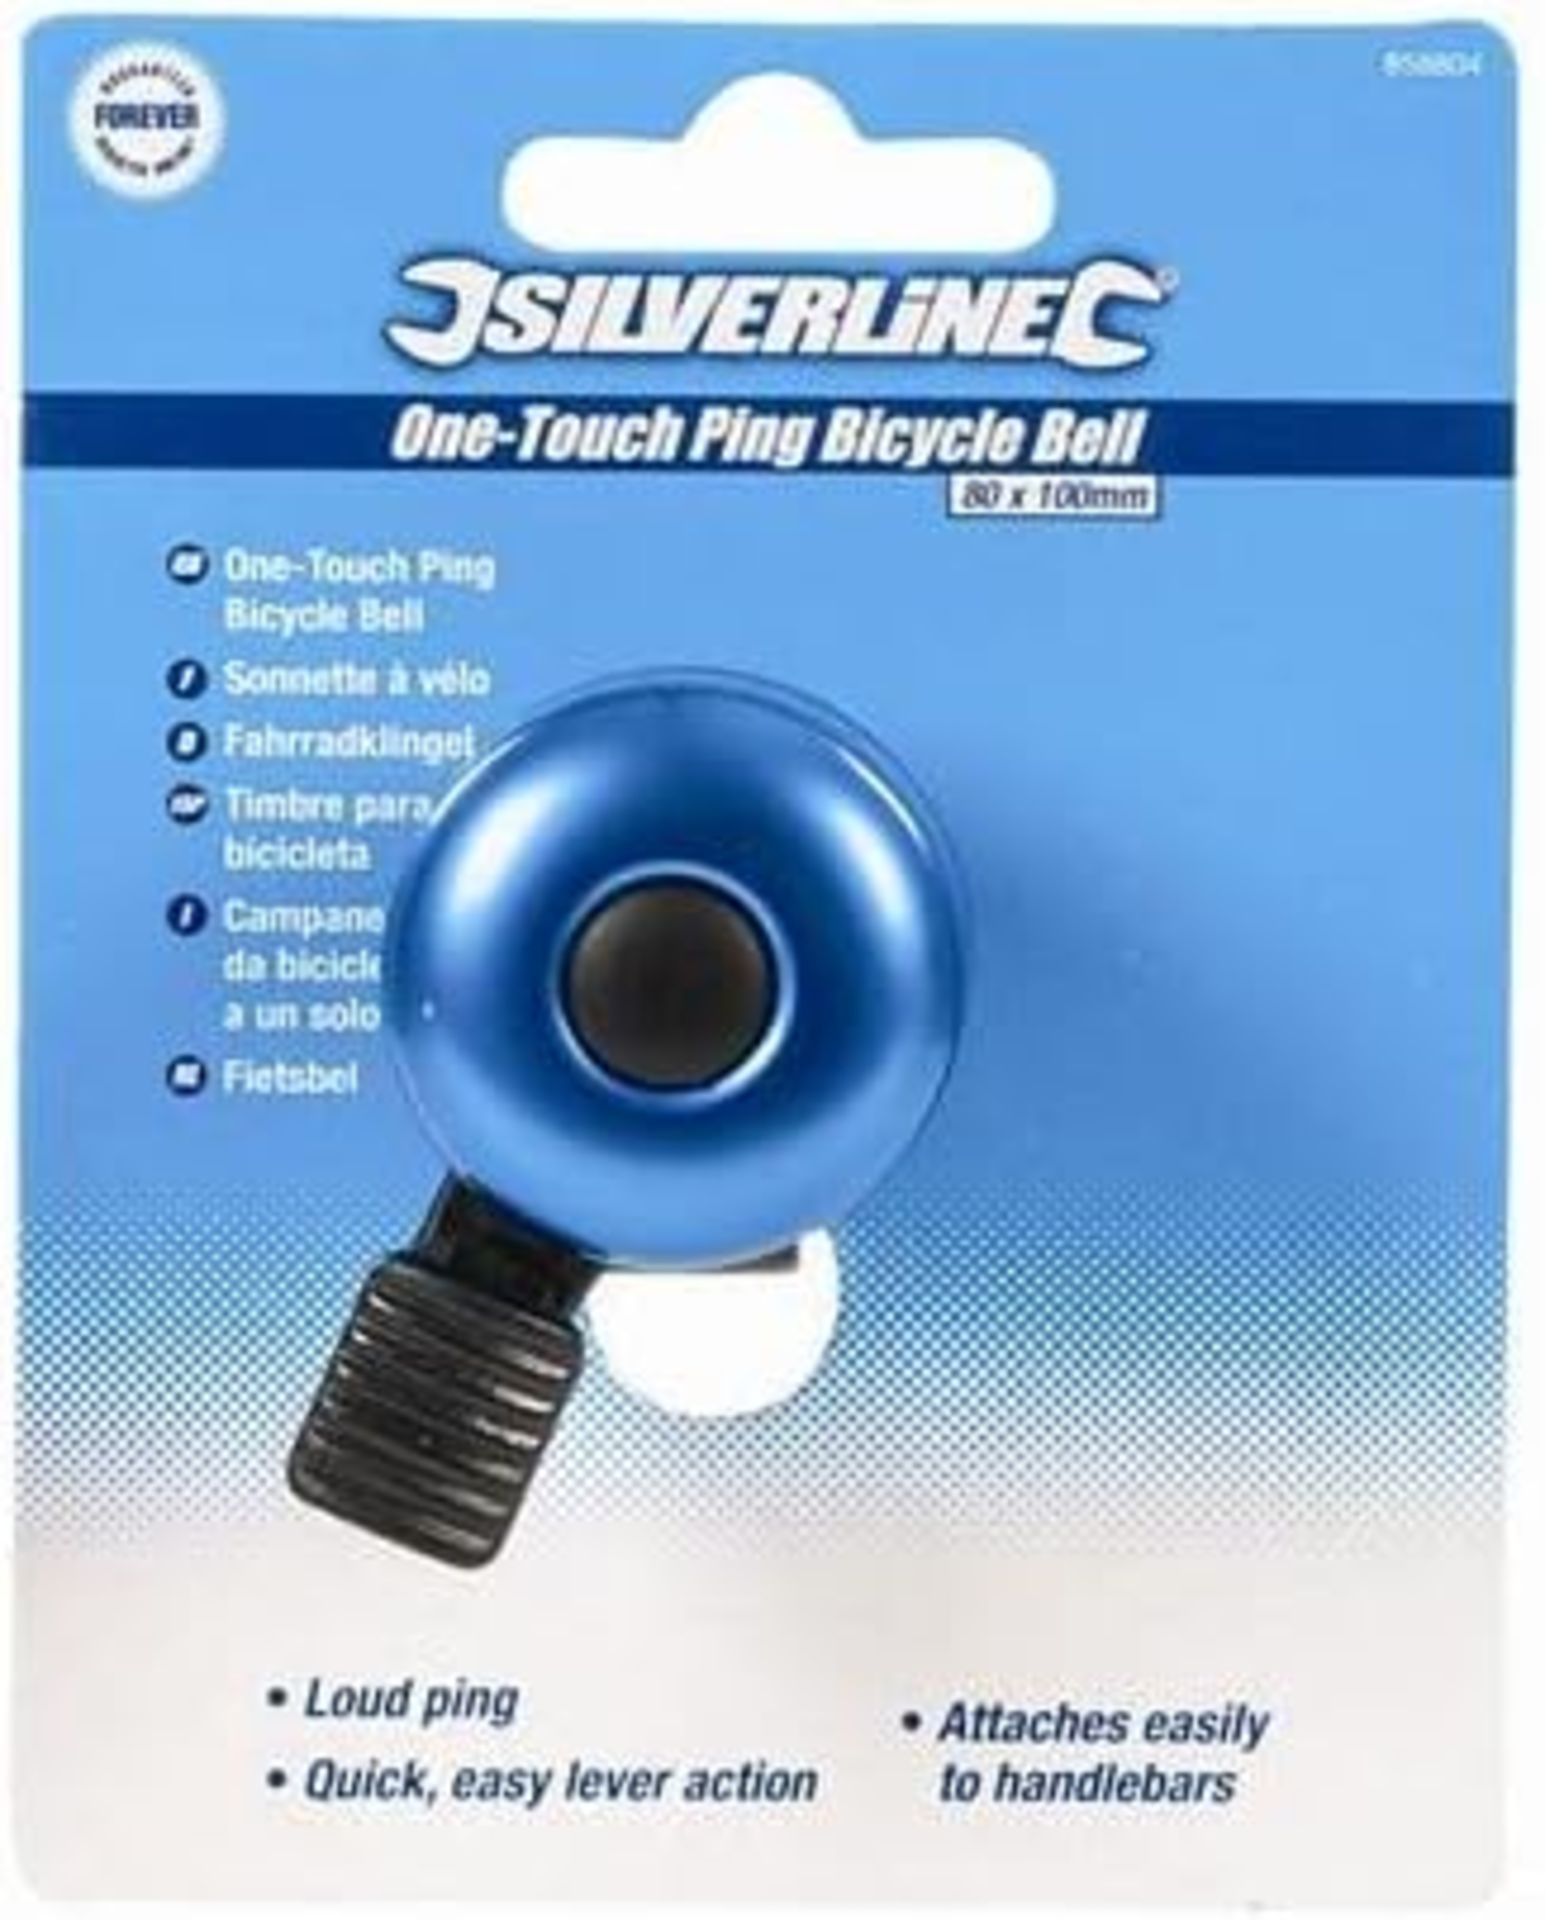 90 X BRAND NEW SILVERLINE ONE TOUCH BICYCLE BELL 80 X 100MM R17.5